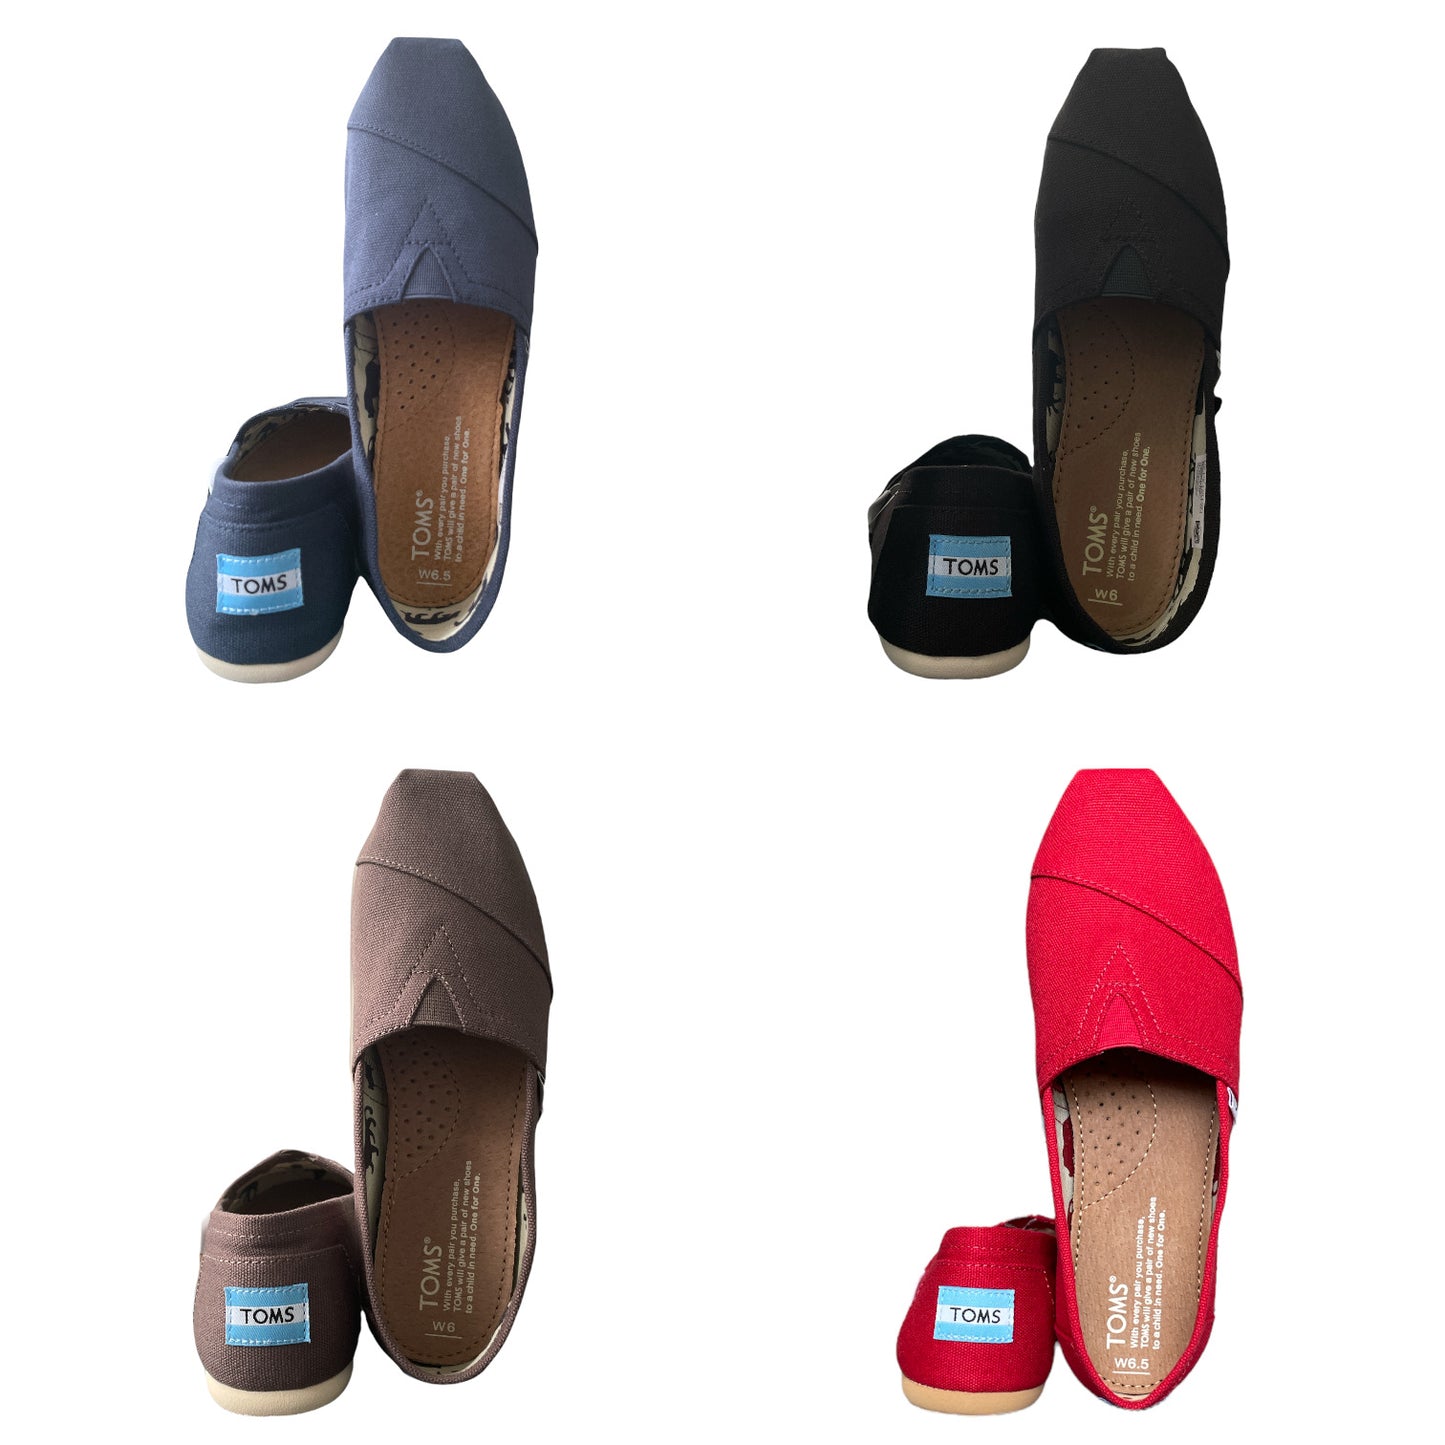 TOMS Women's Classic Slip-On Casual Canvas Flat Shoes